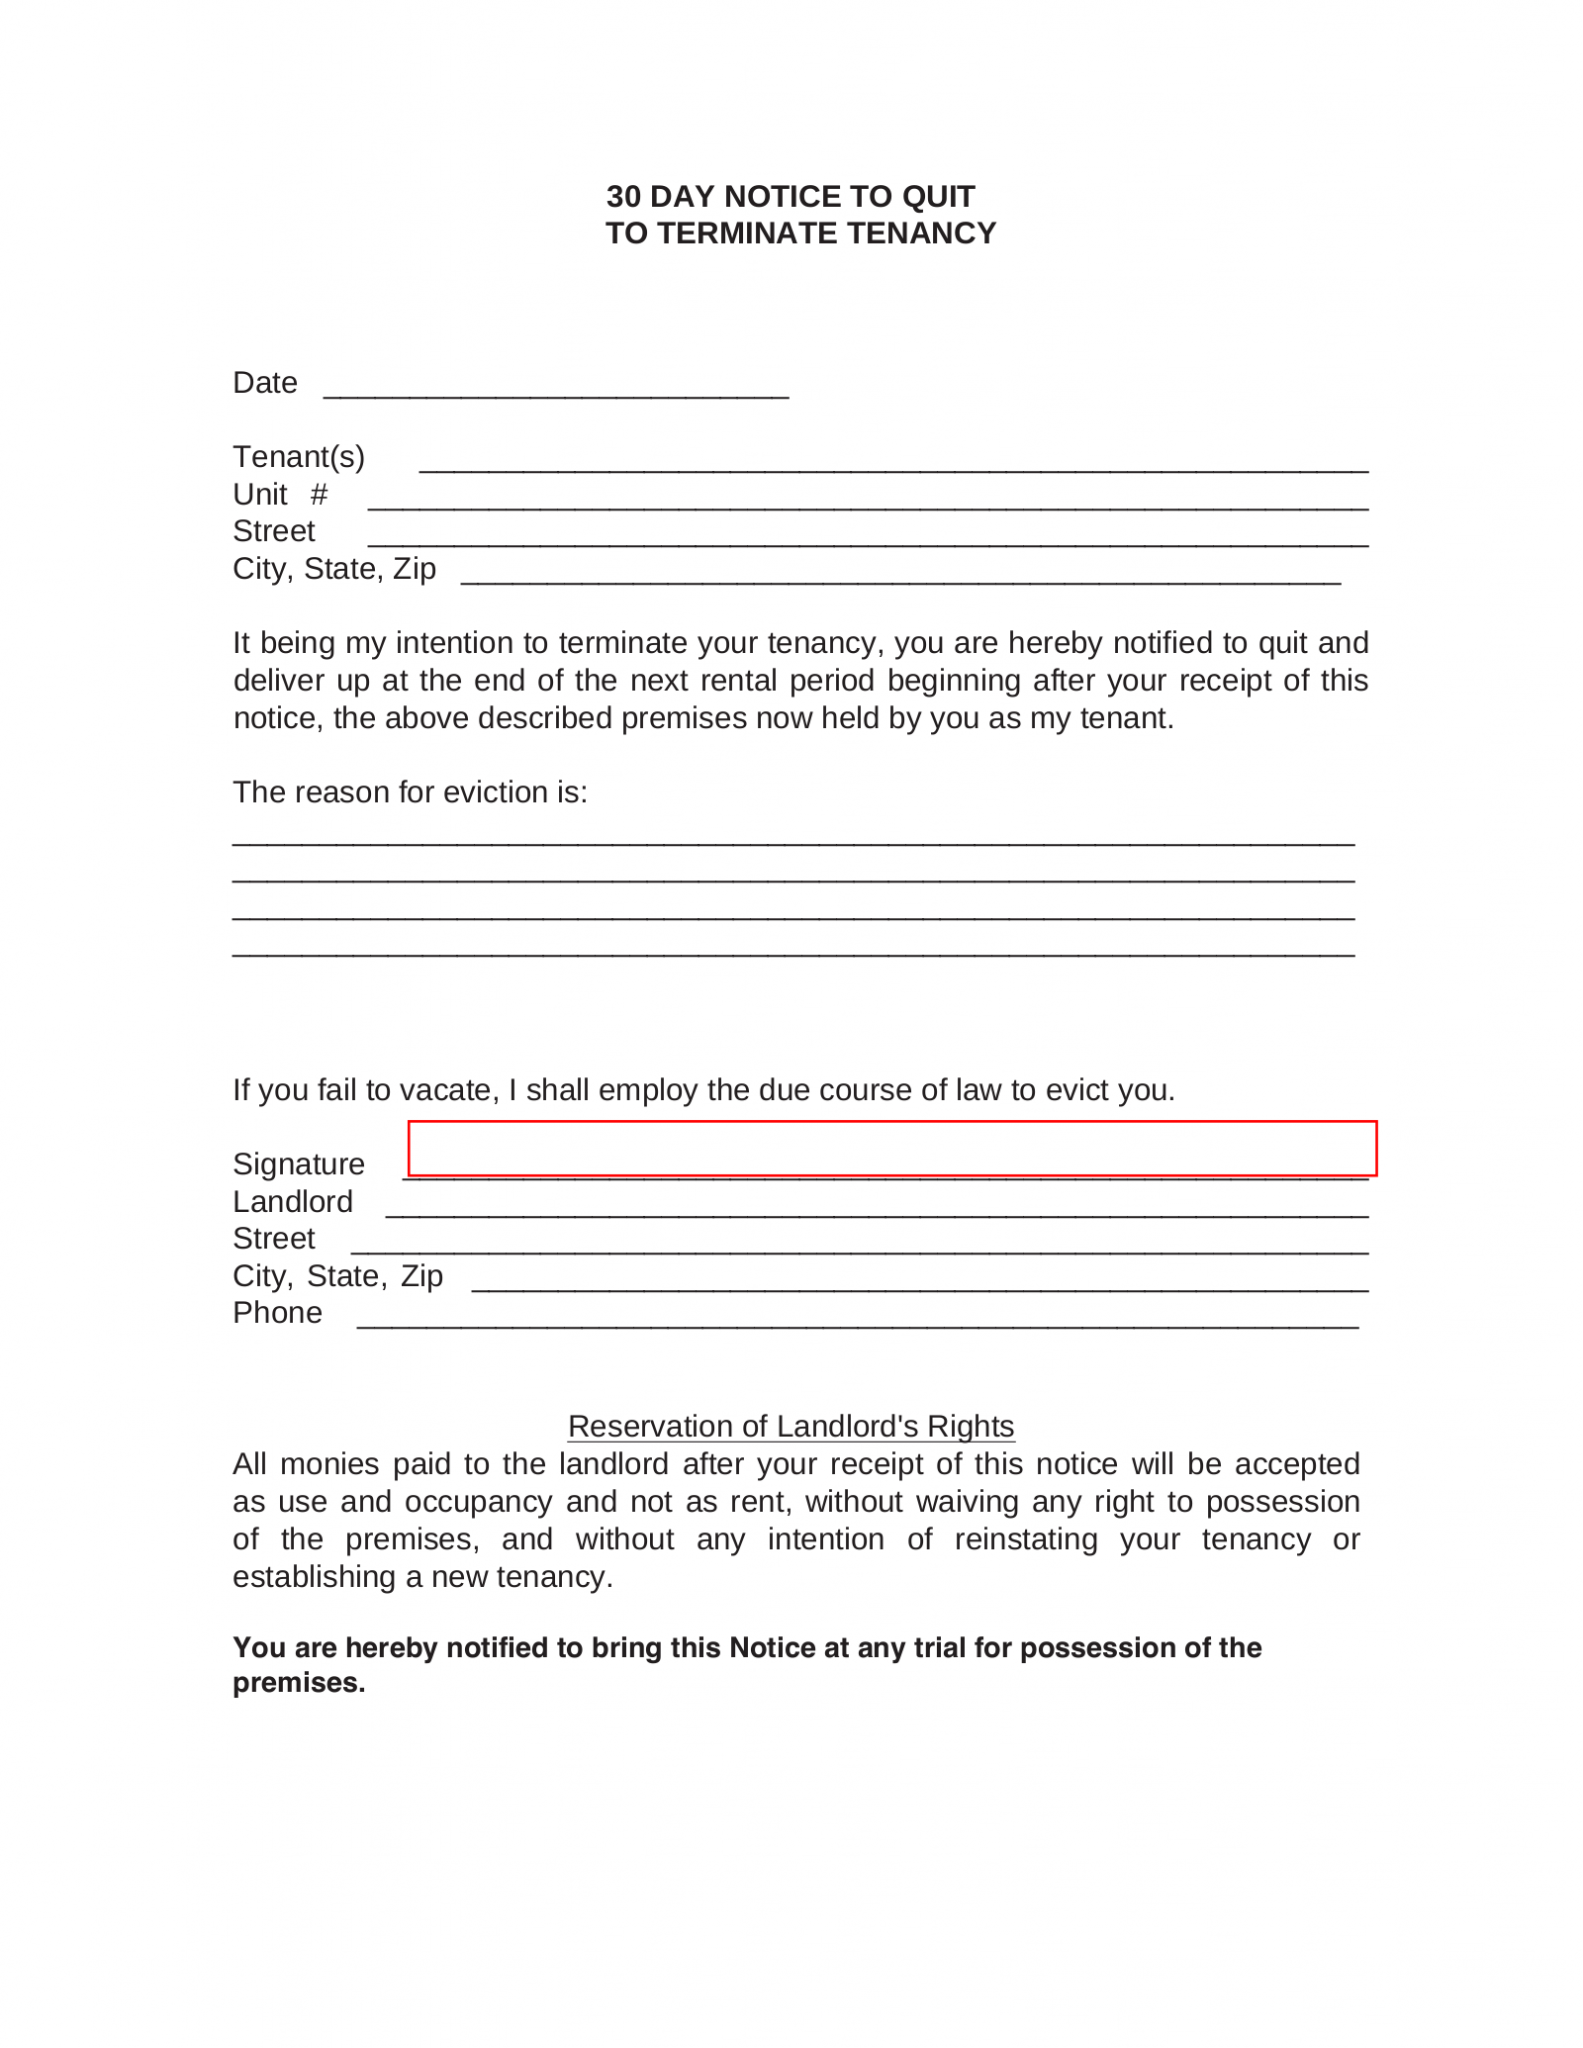 free-massachusetts-eviction-notice-forms-3-pdf-word-eforms